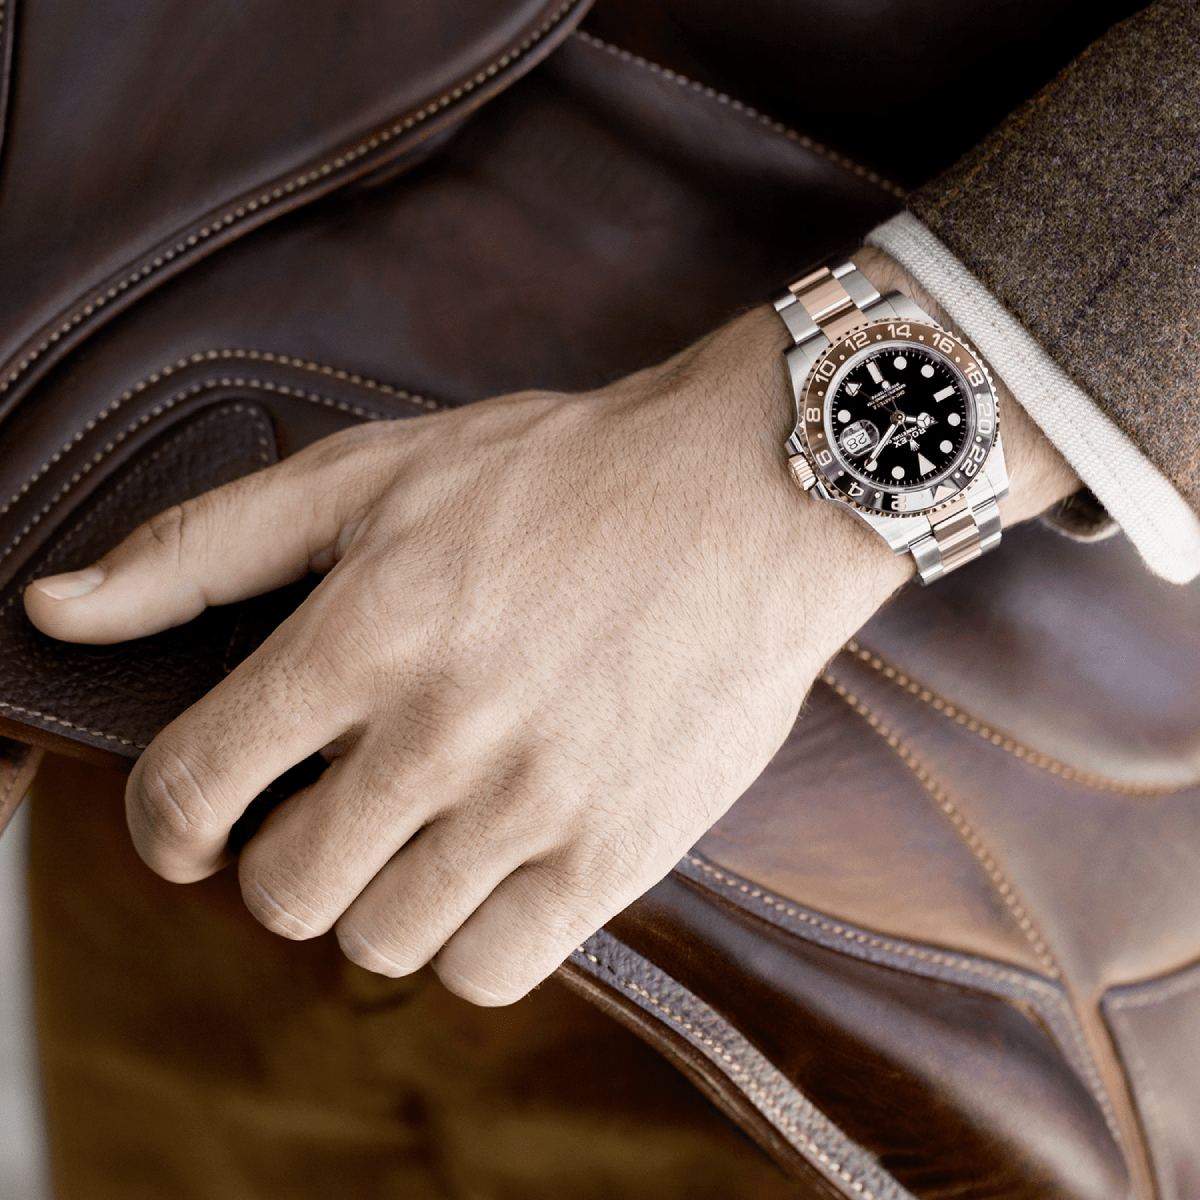 Rolex Oyster Perpetual GMT-Master II In Everose Rolesor - Kee Hing Hung